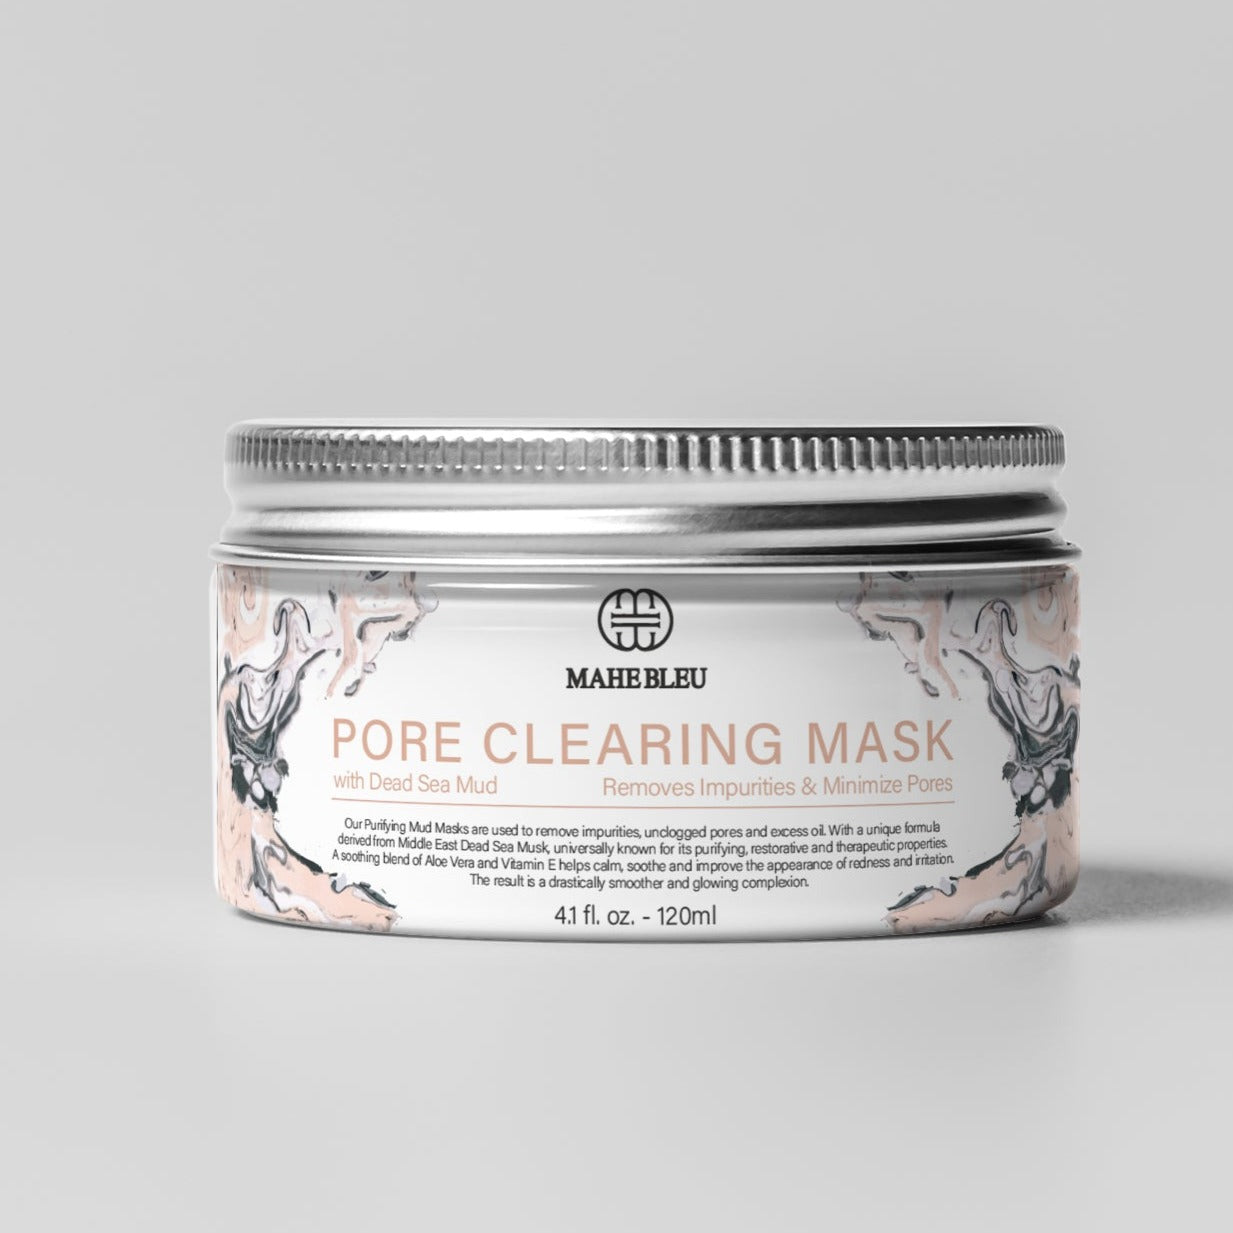 Pore Clearing Mask with Dead Sea Mud - Removes Impurities & Minimize Pores